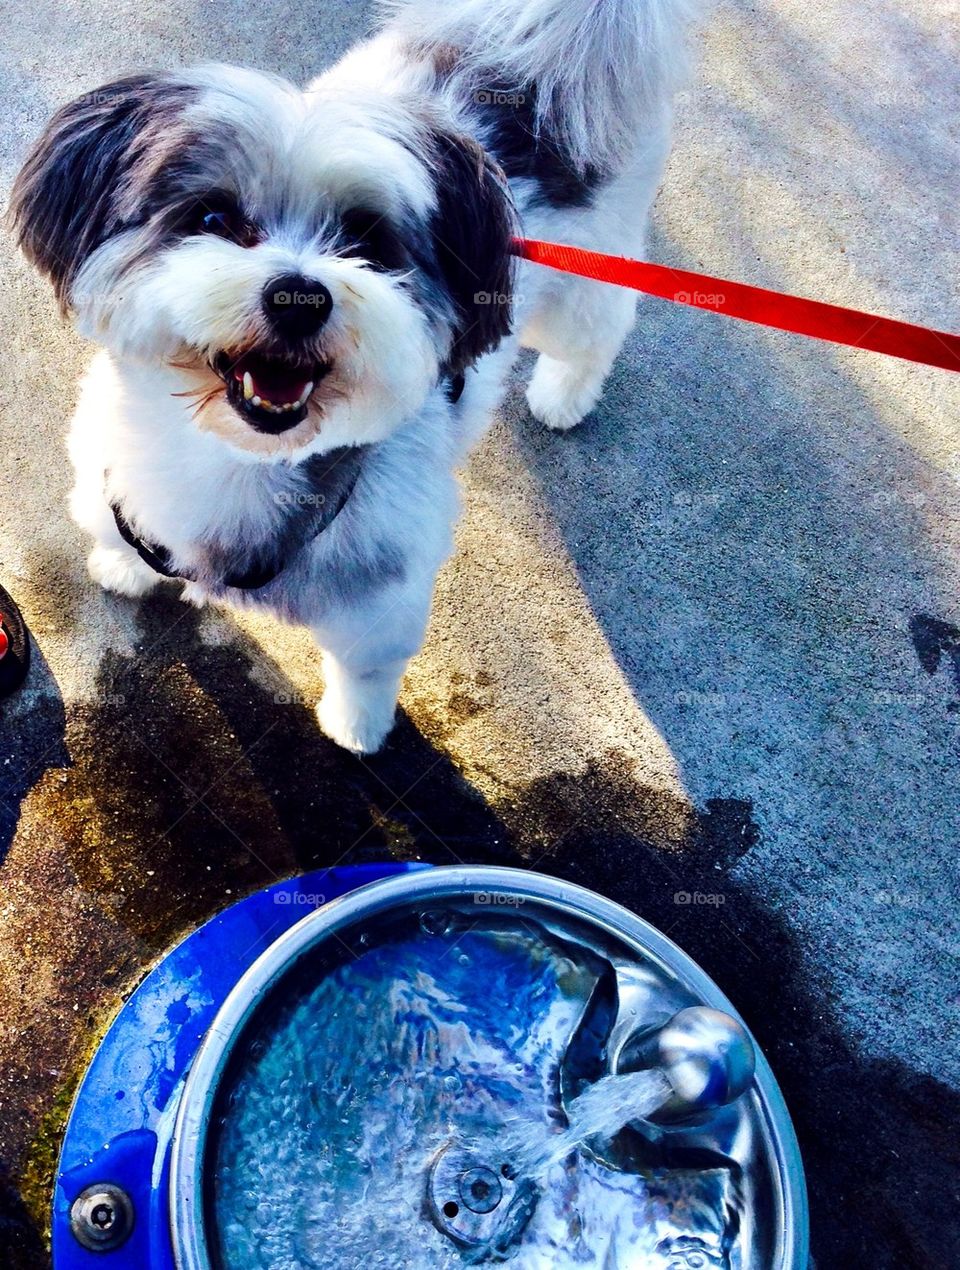 Marley having to have a drink at the local doggie fountain. 